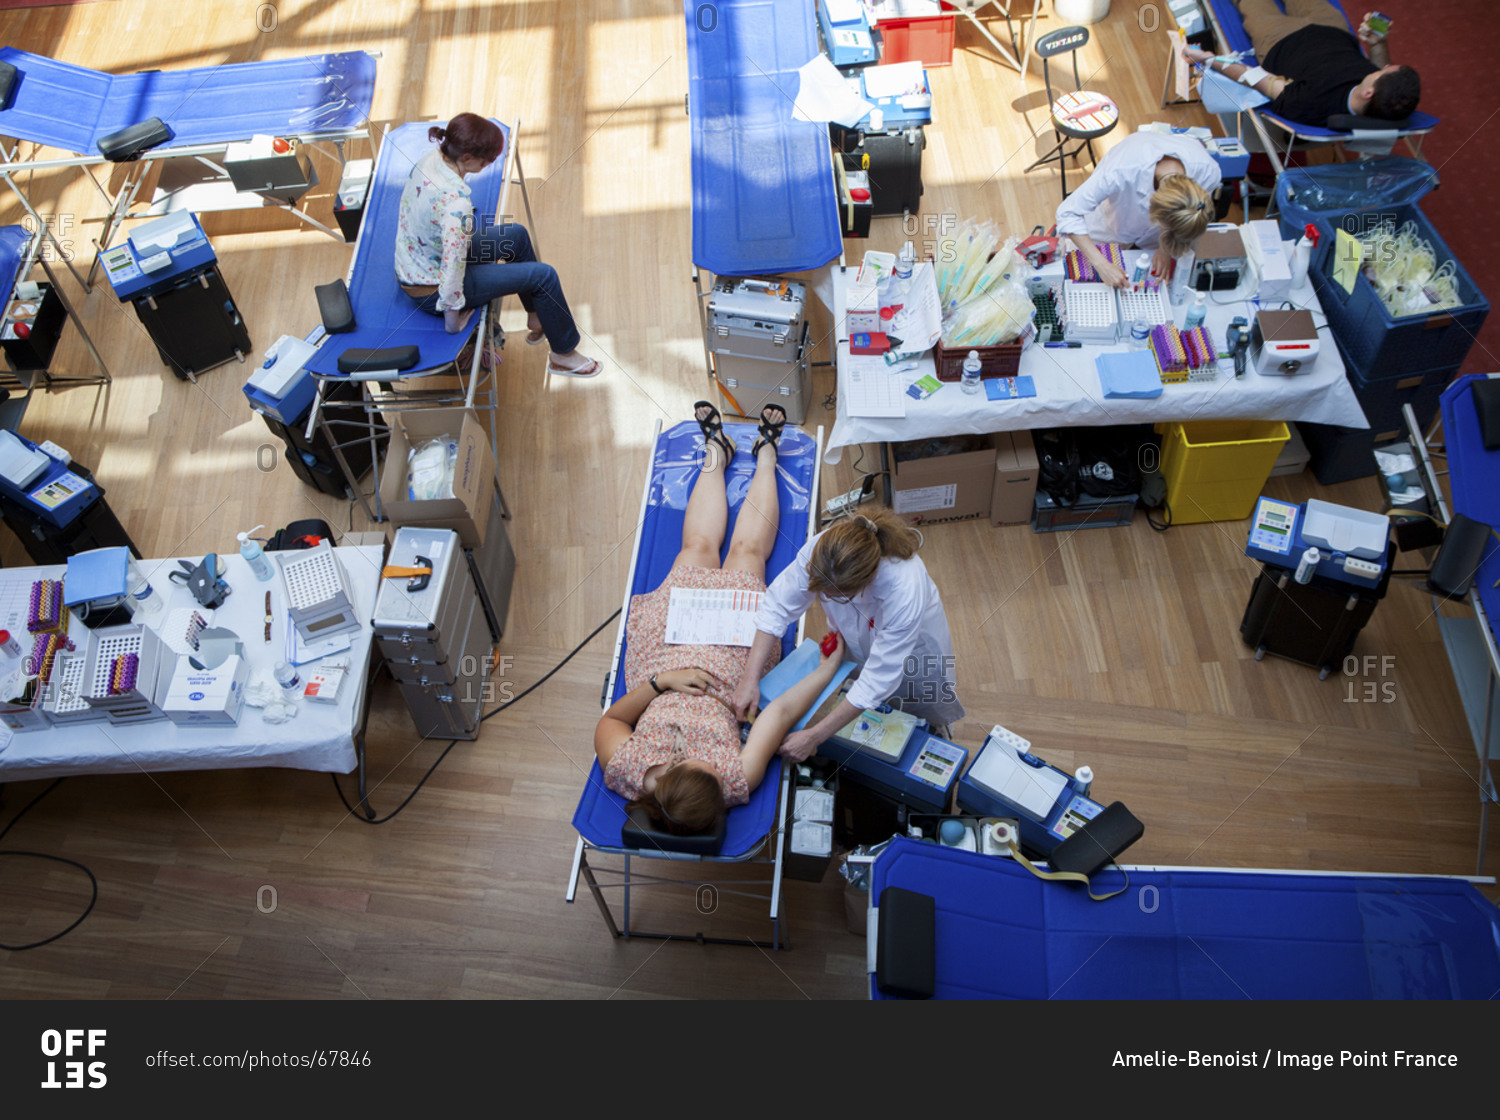 Overhead view of mobile blood donation unit